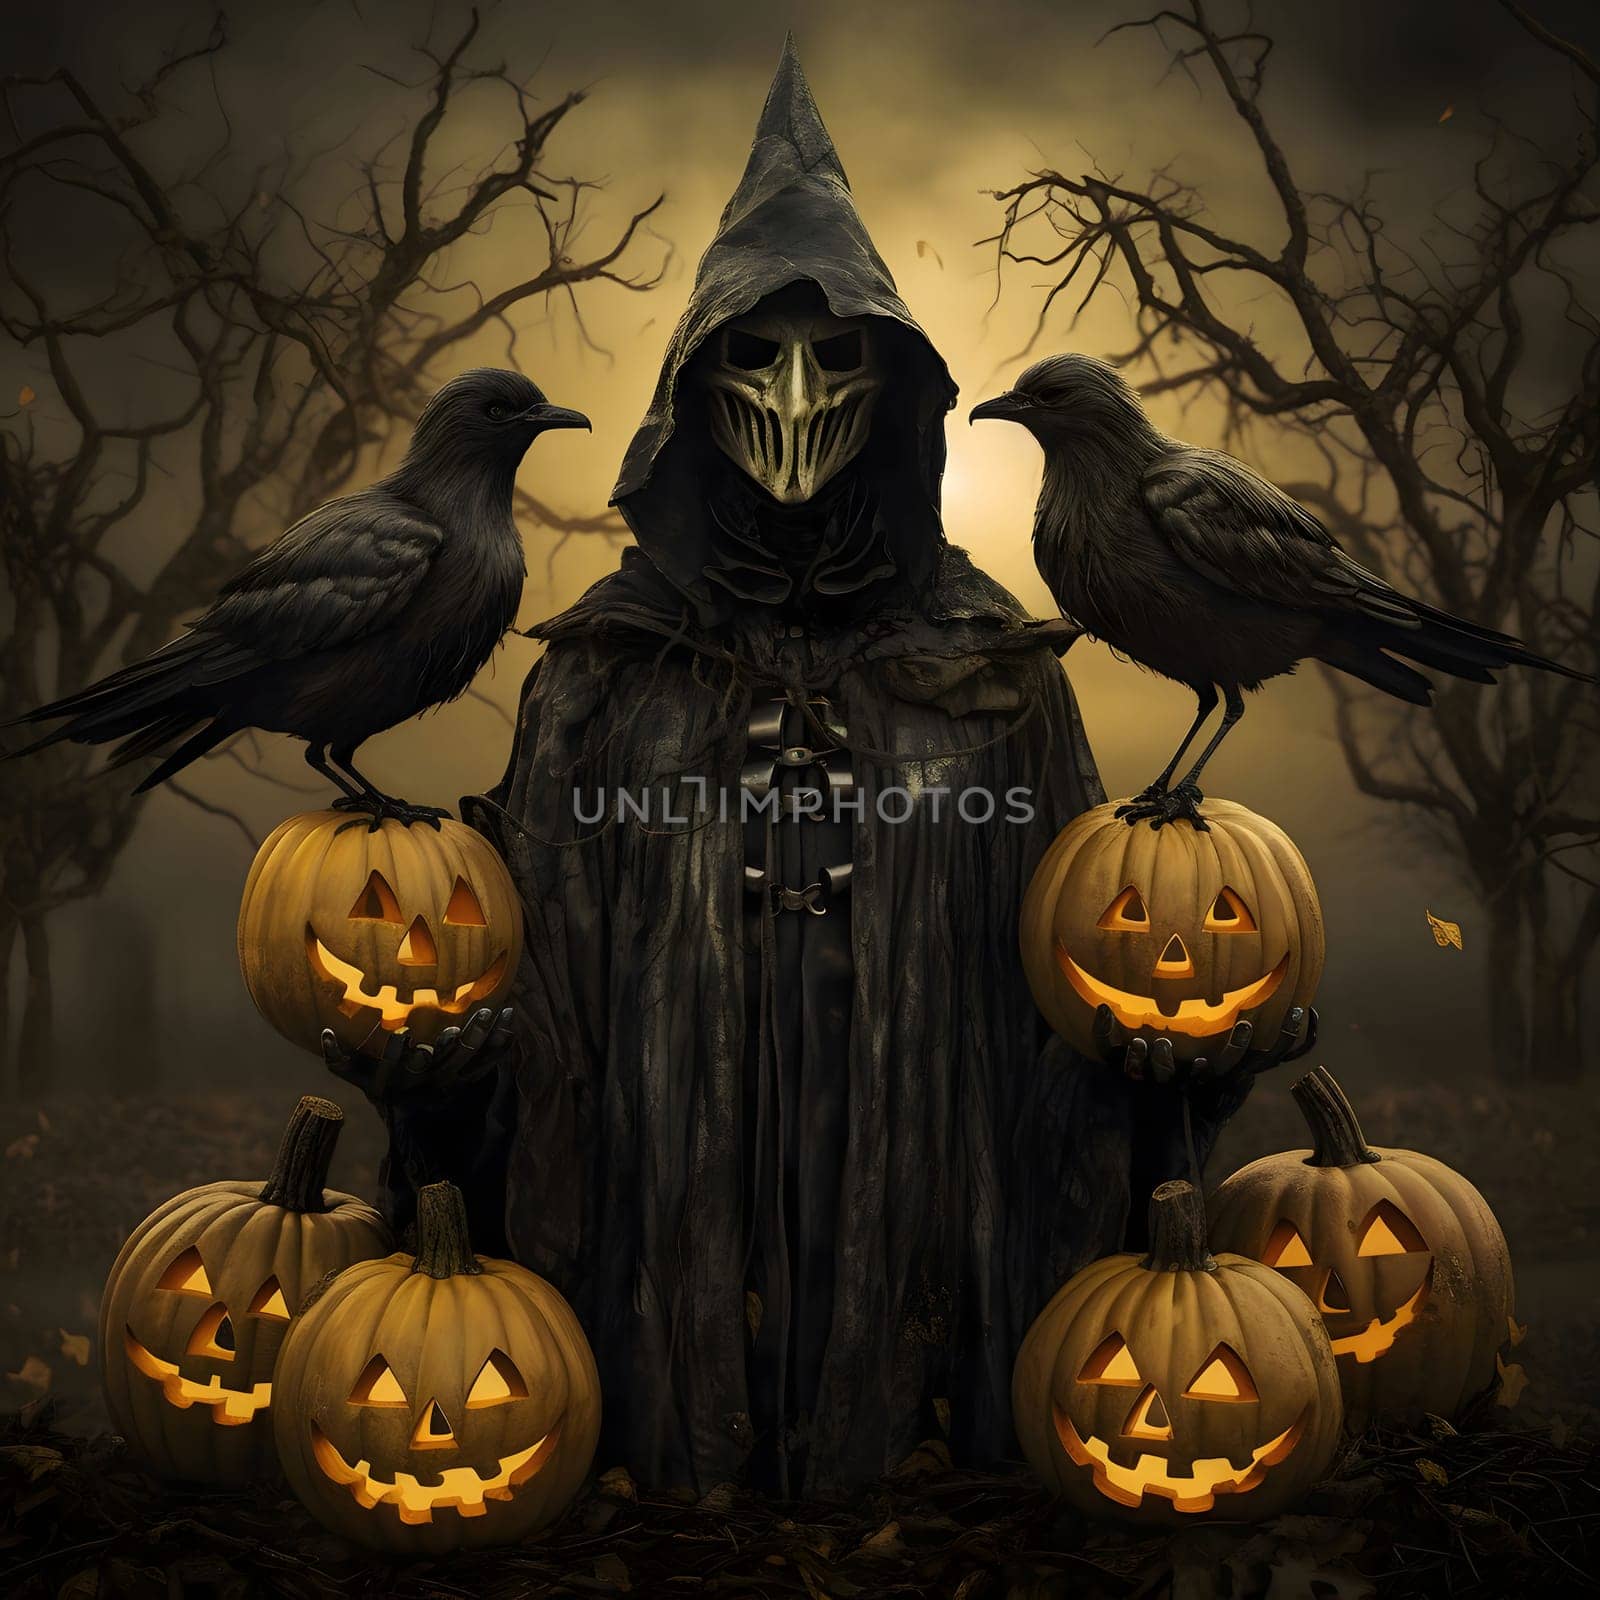 Dark mysterious black figure with two Crows and six glowing jack-o-lanterns against a background of fog, forest, a Halloween image. by ThemesS